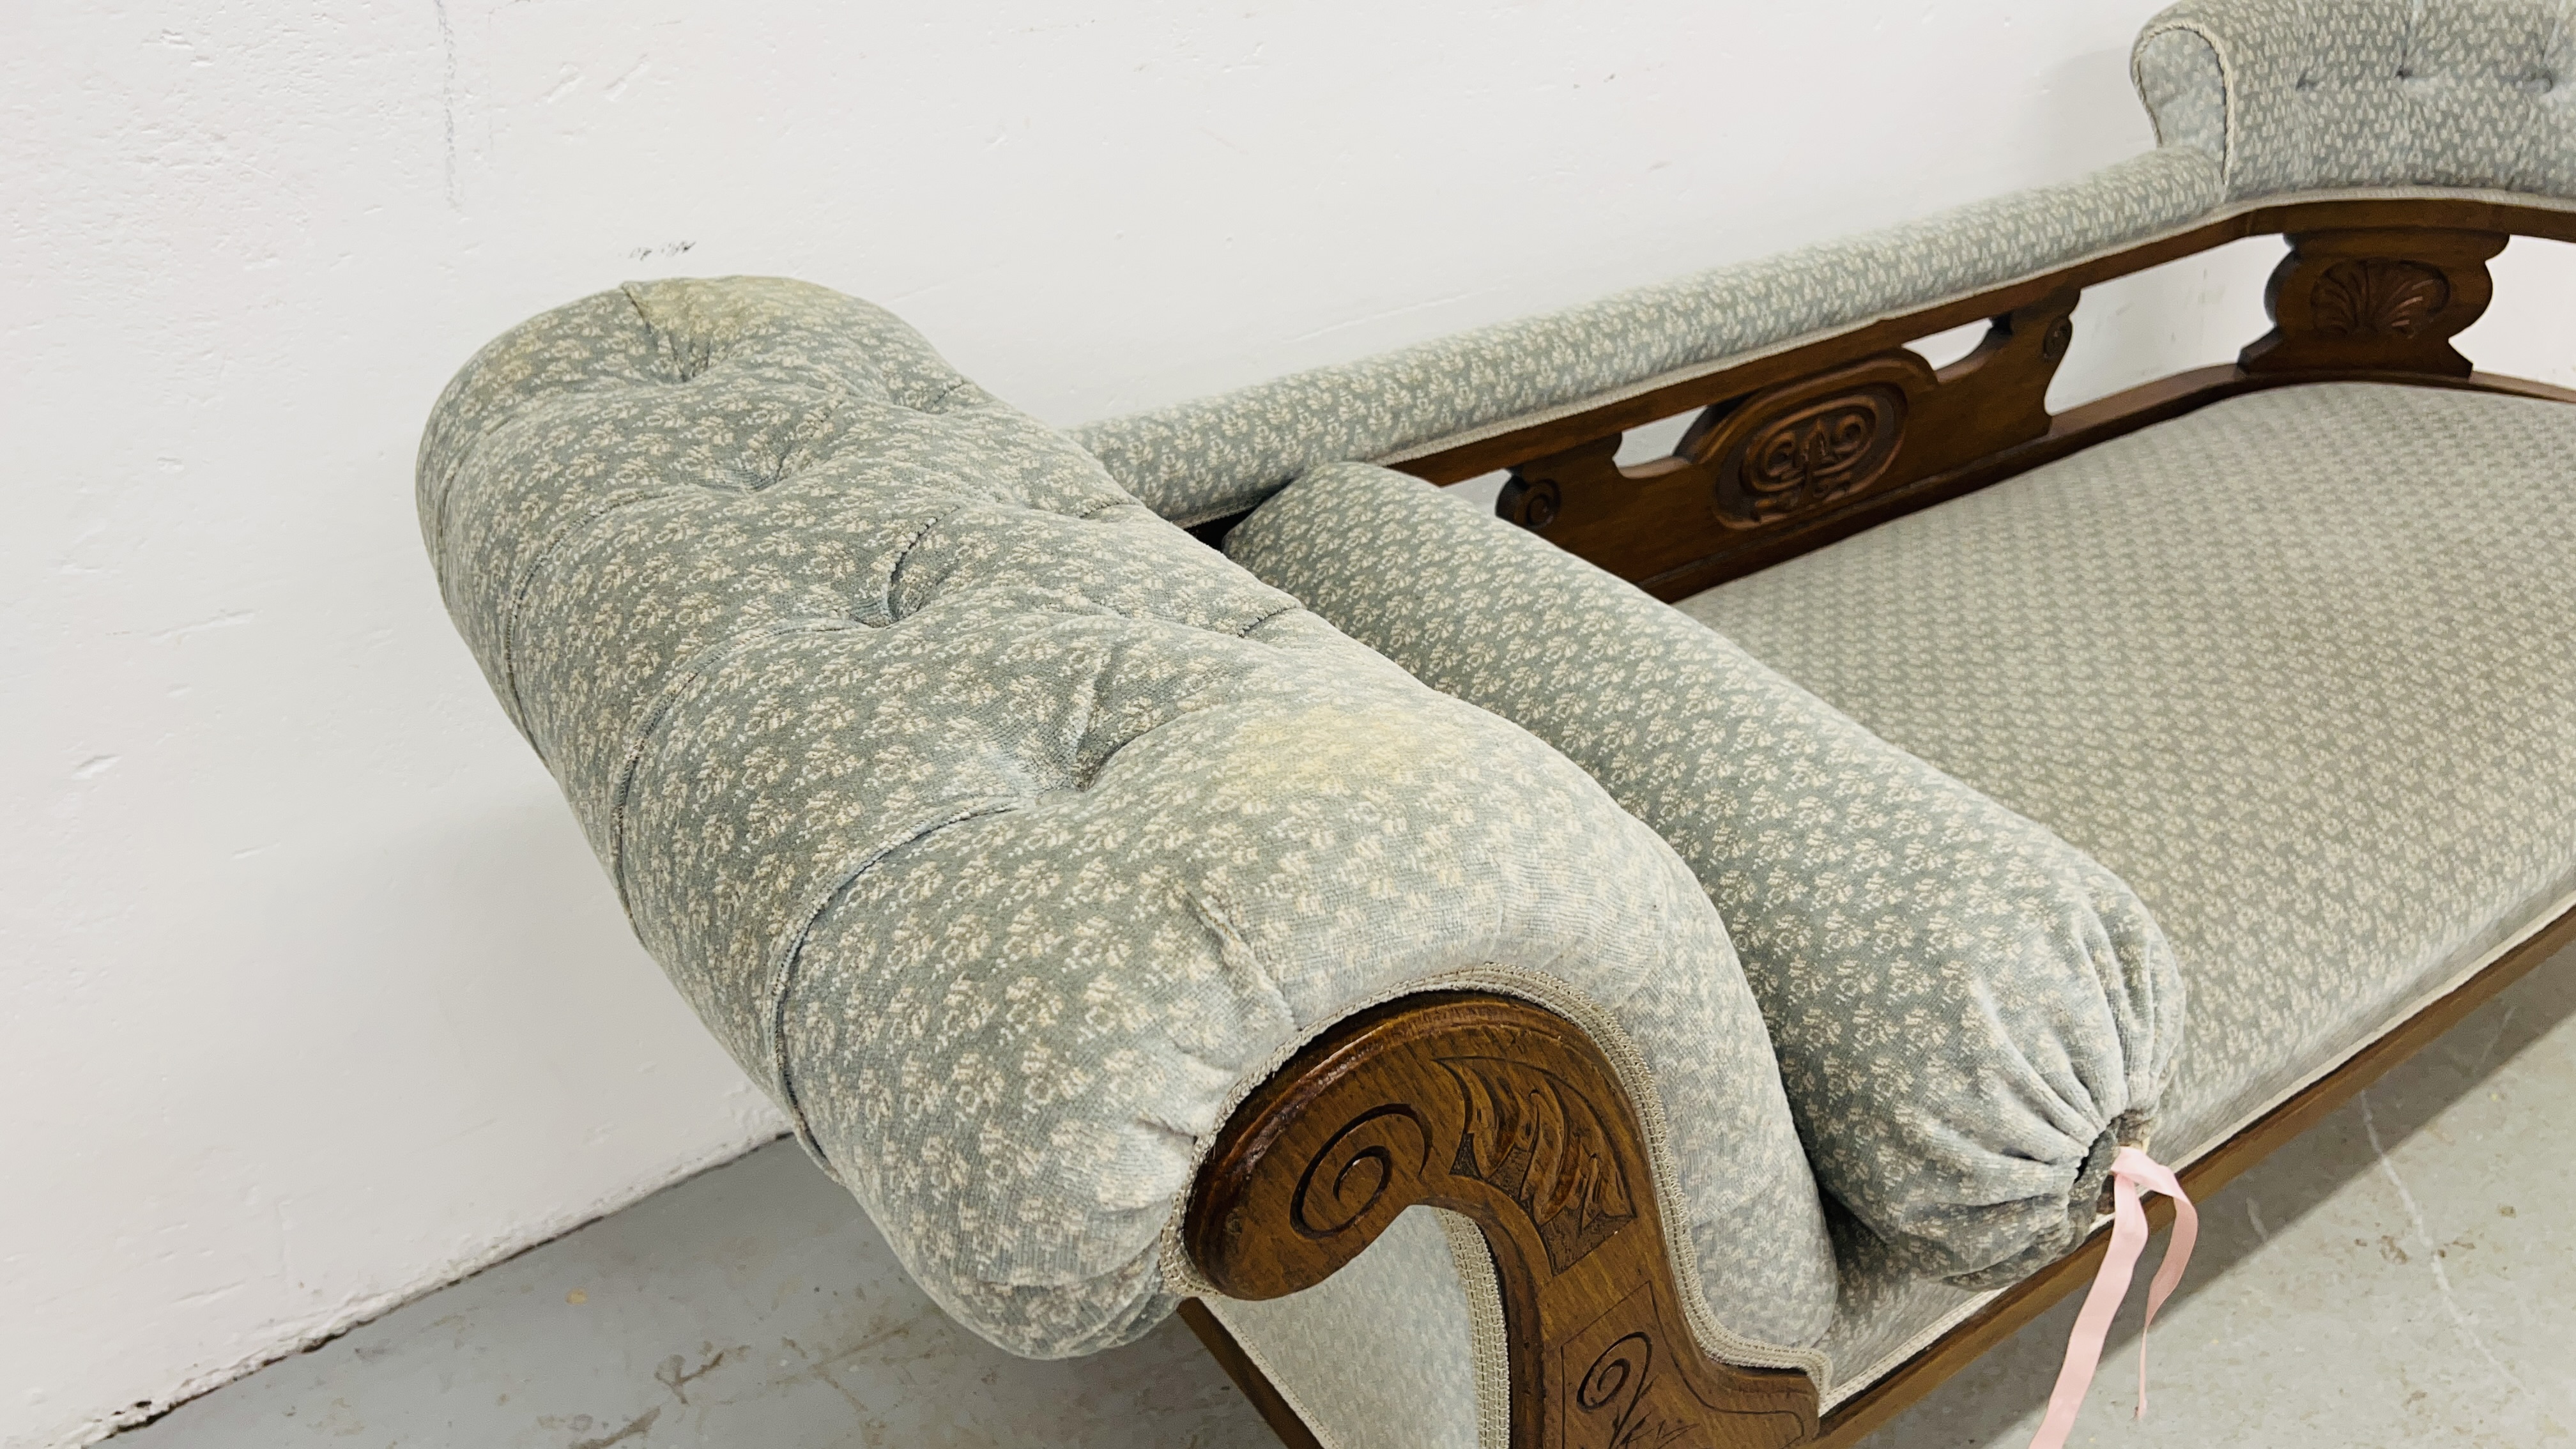 AN EDWARDIAN OAK CHAISE LONGUE UPHOLSTERED IN PASTEL BLUE - Image 7 of 8